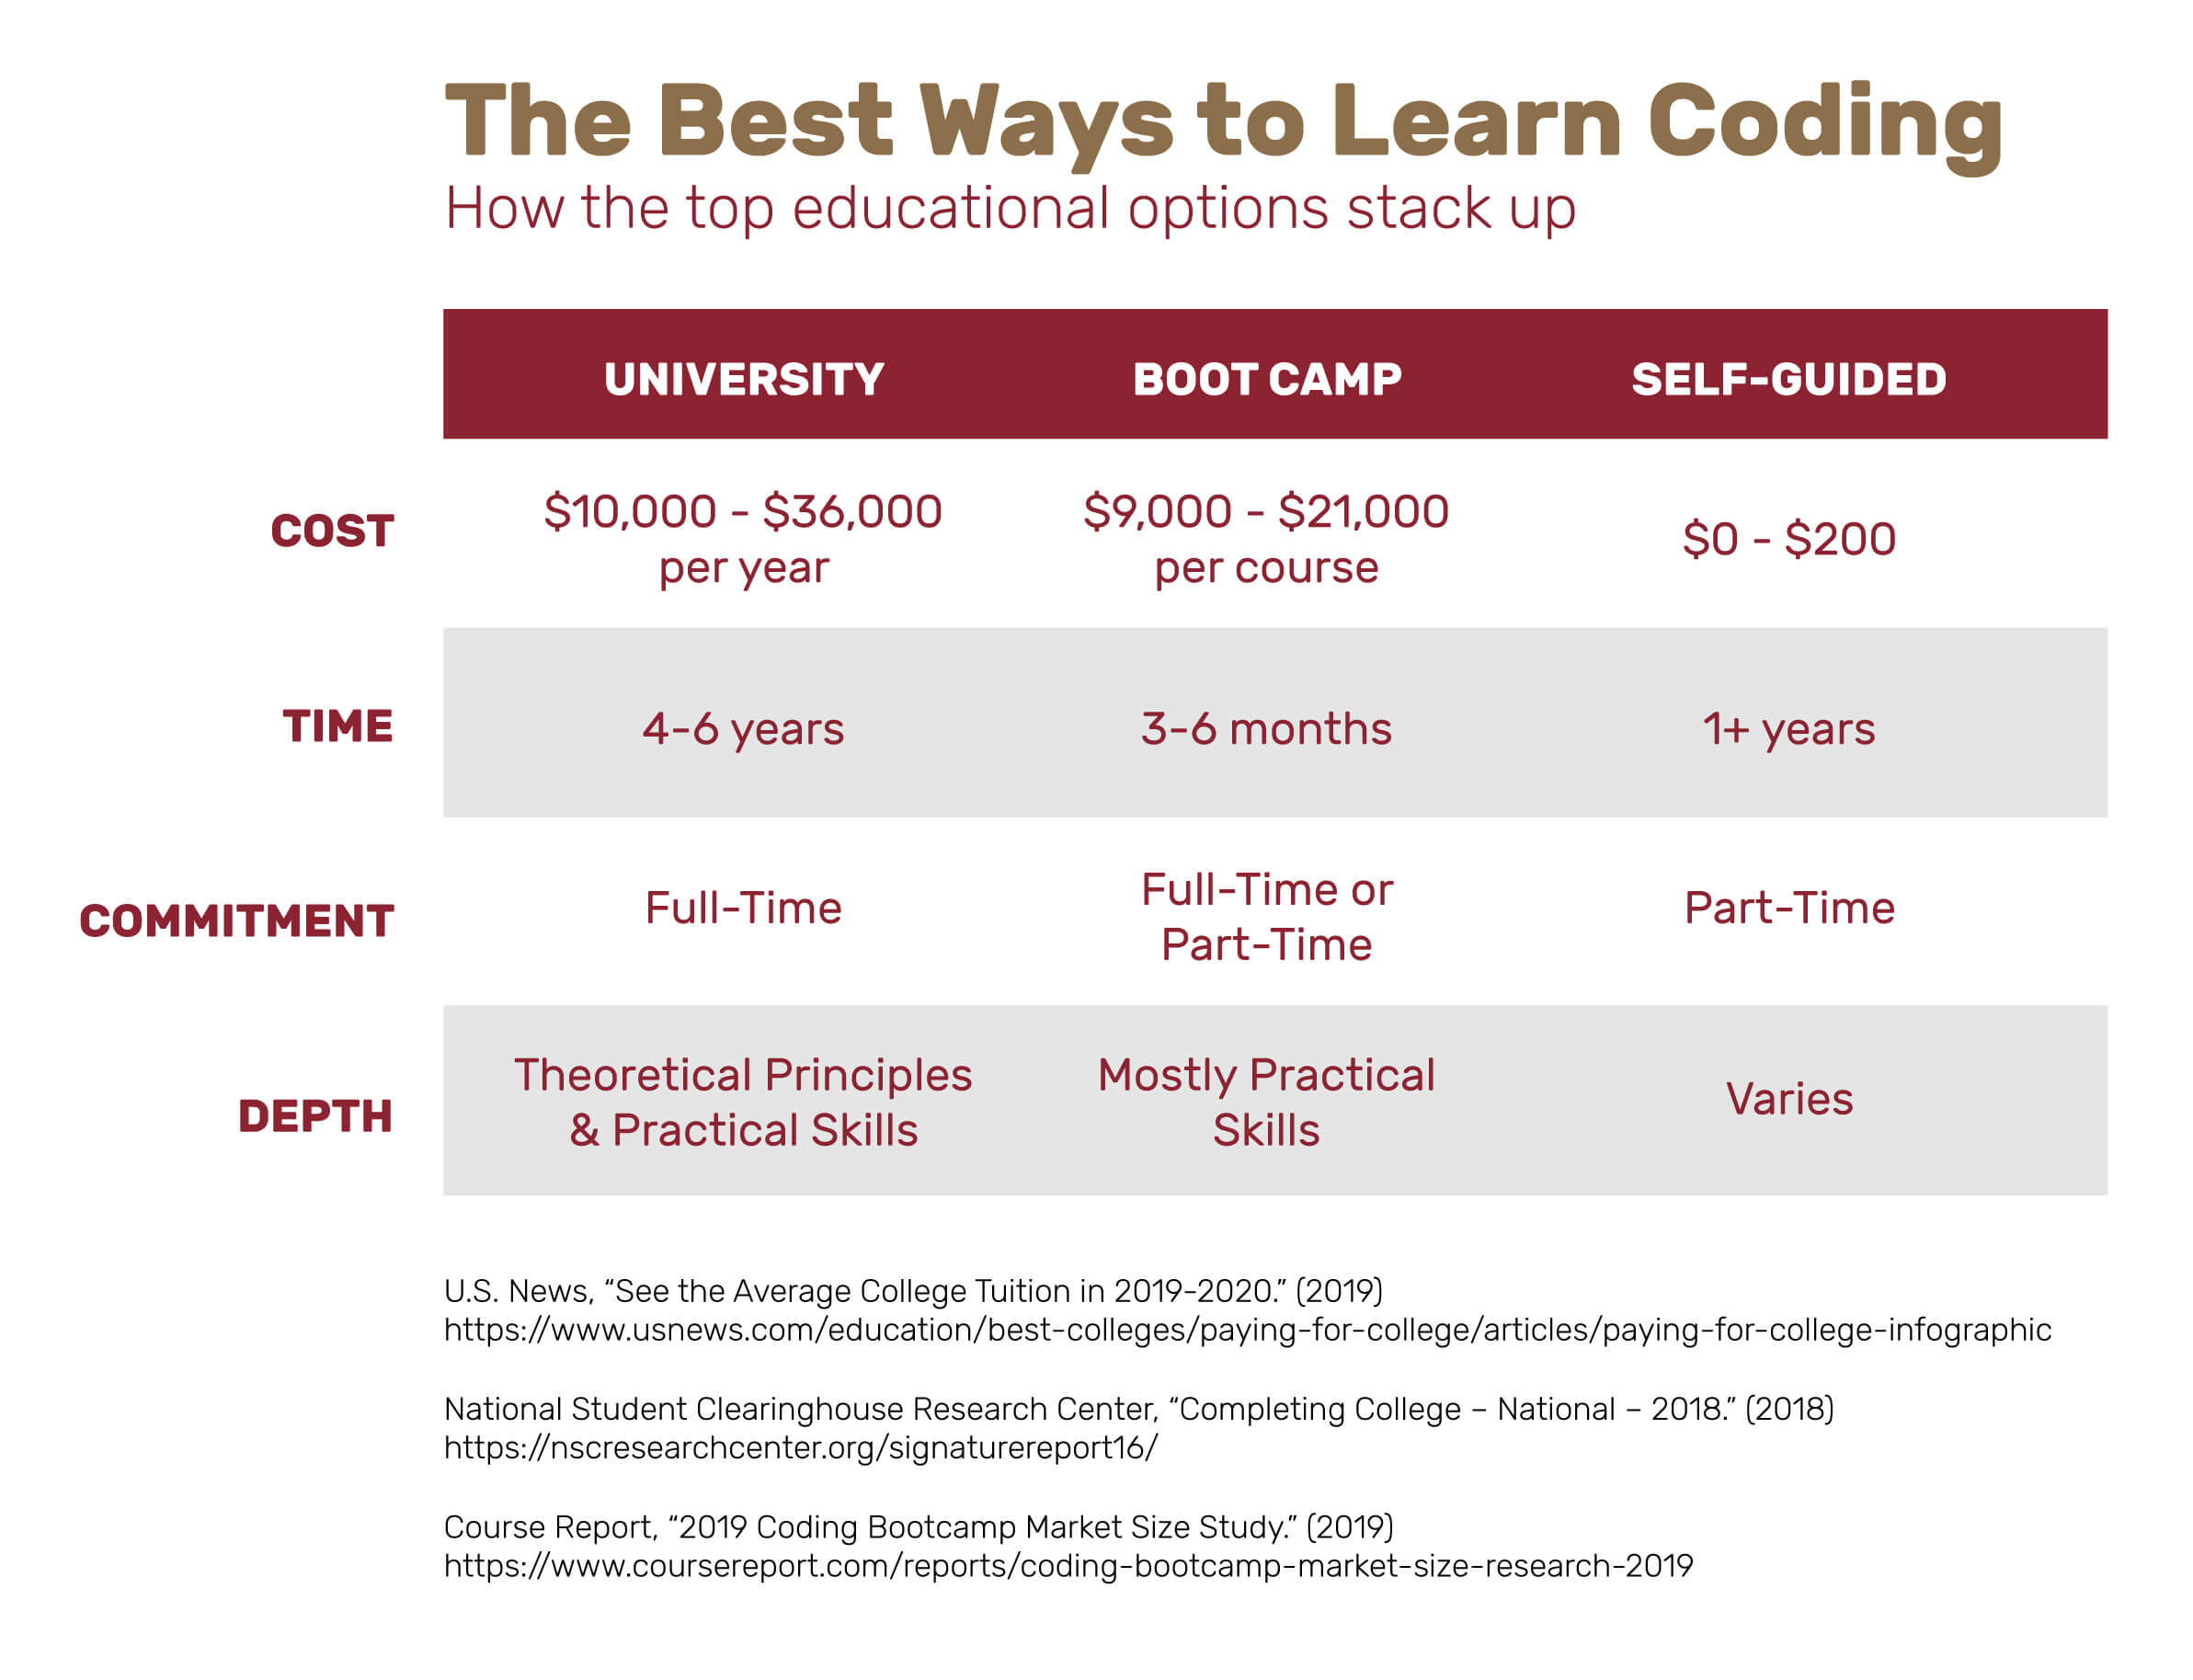 The best ways to learn coding, and how they compare